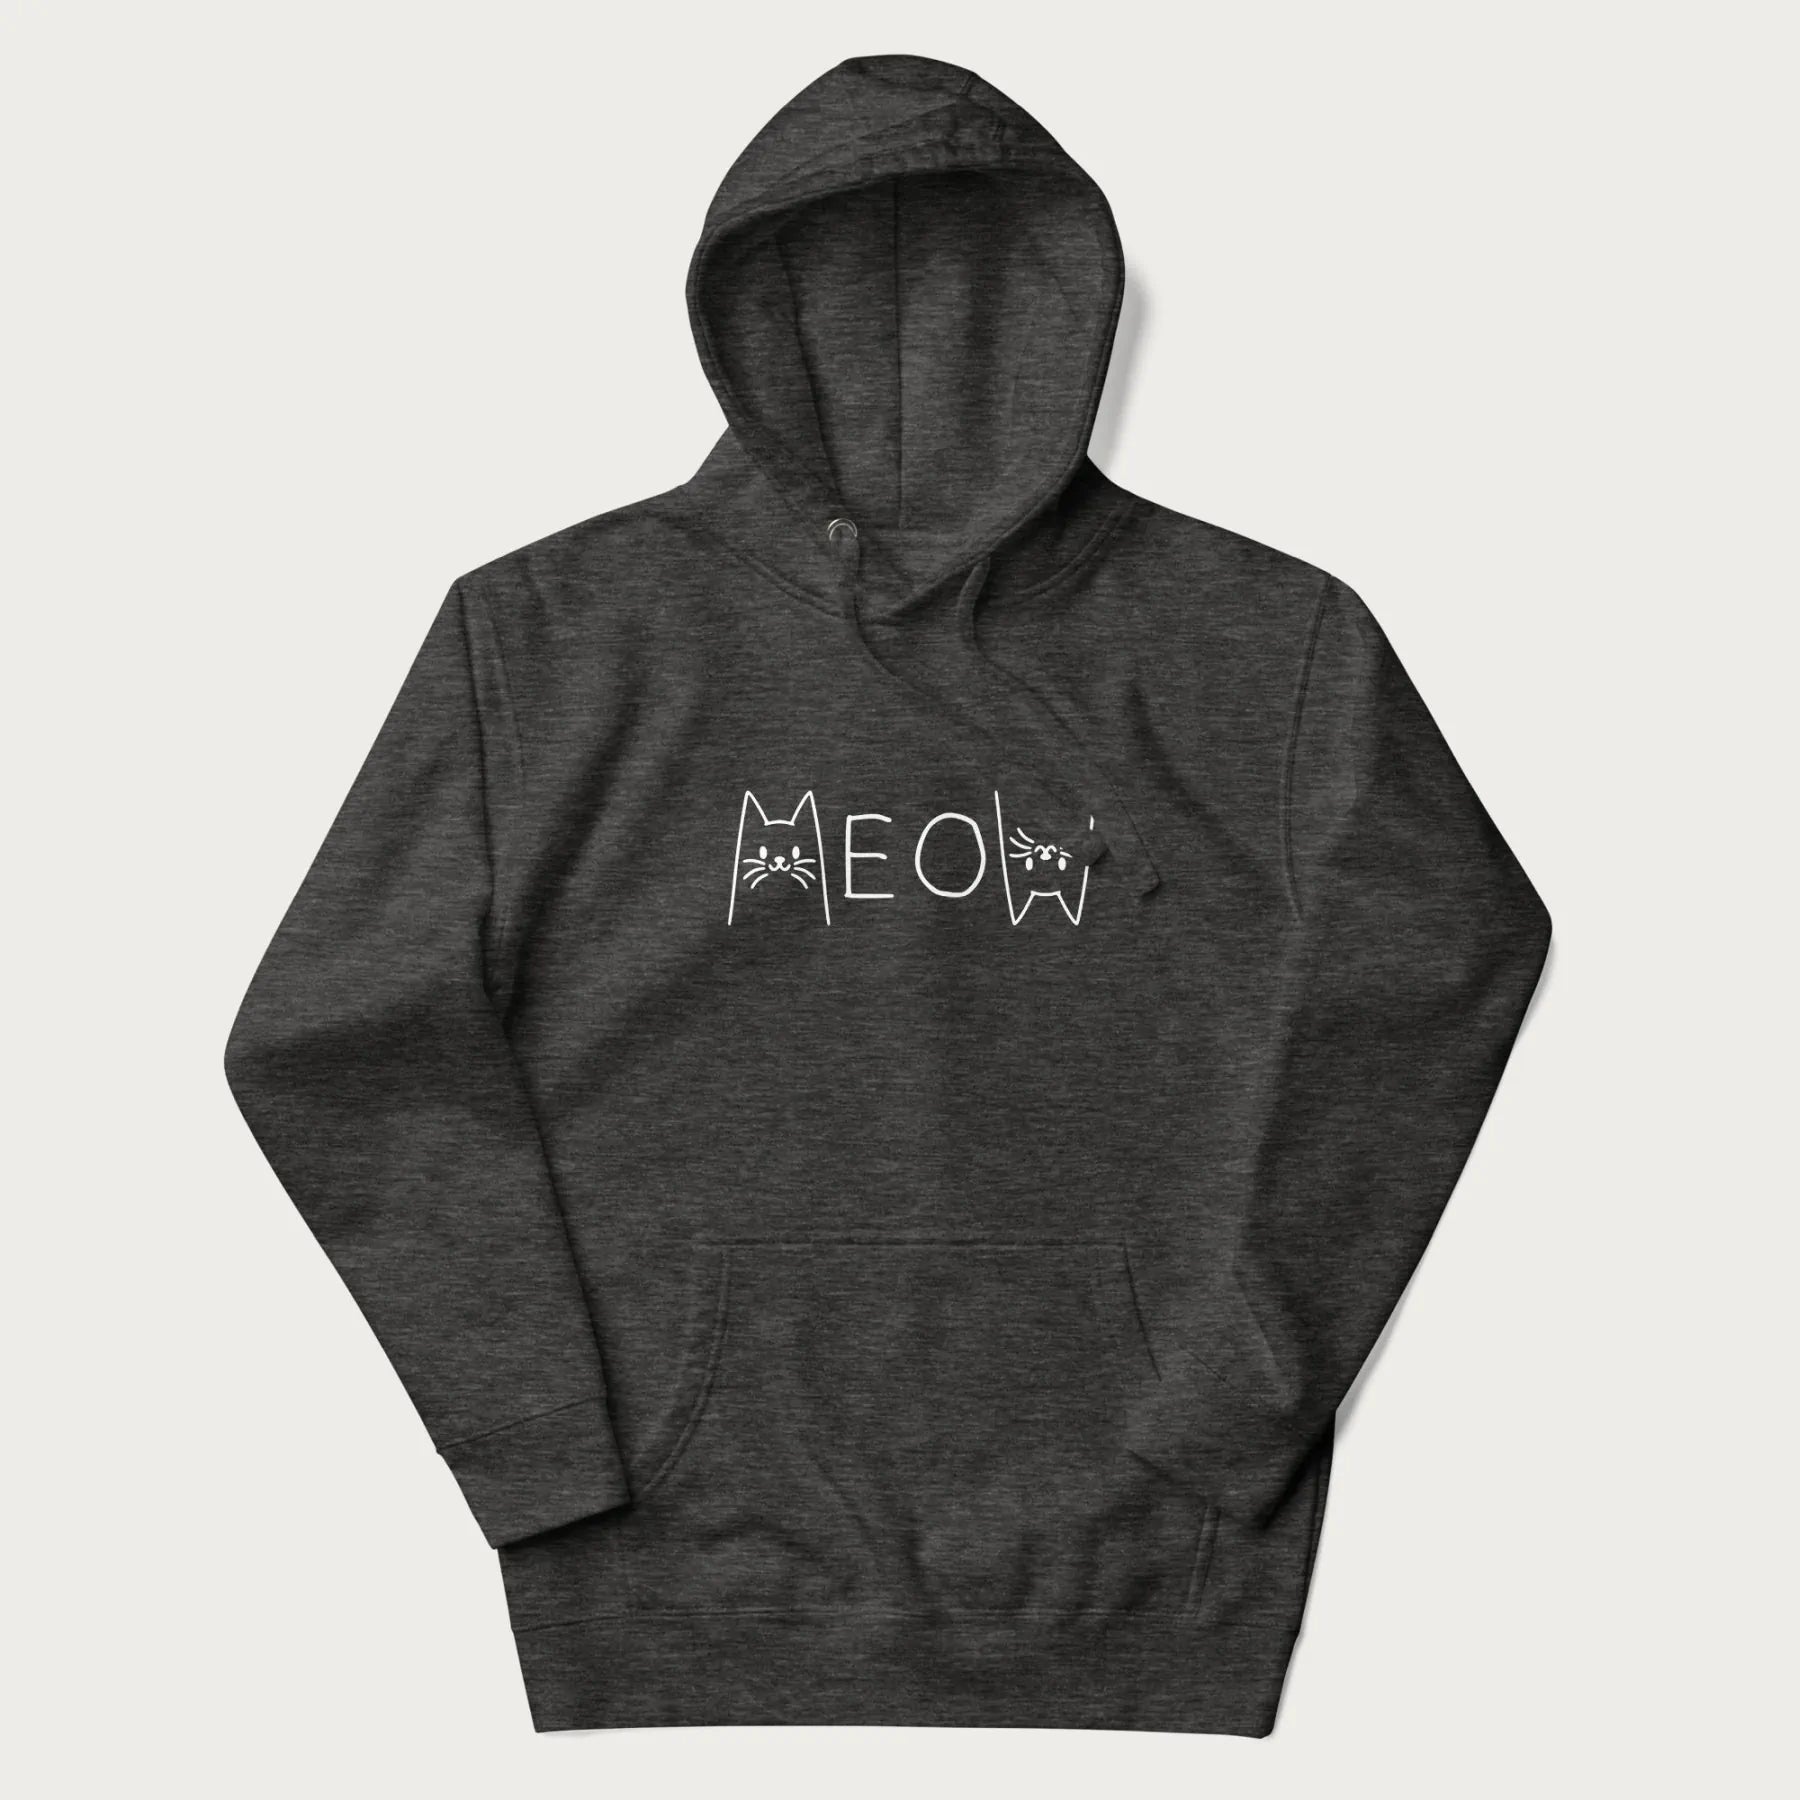 Dark grey meow hoodie with a simple 'MEOW' text and cute cat face graphics on the front.